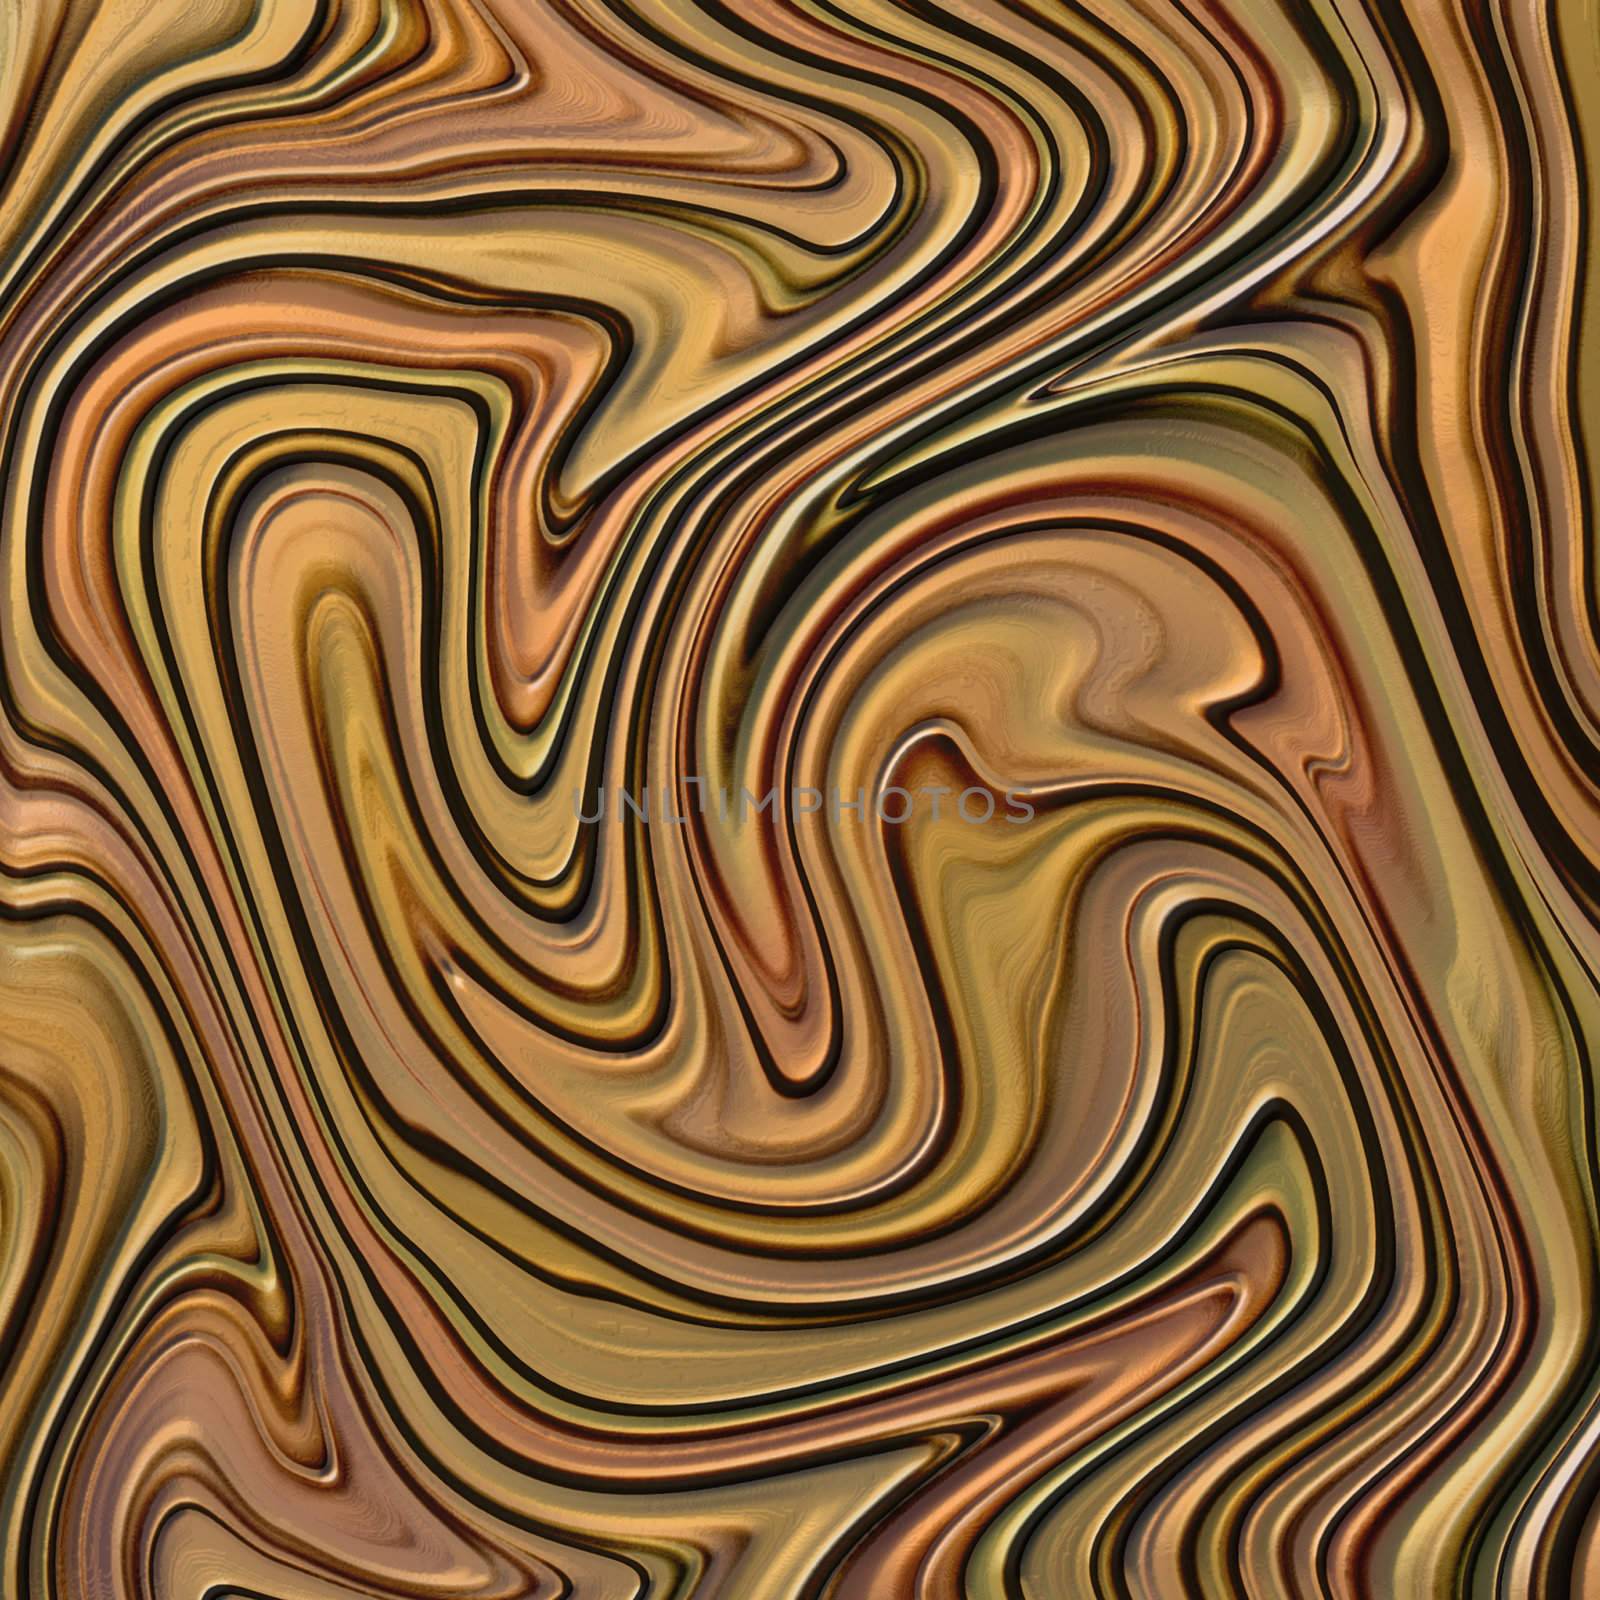 A Swirling Metallic Abstract Background